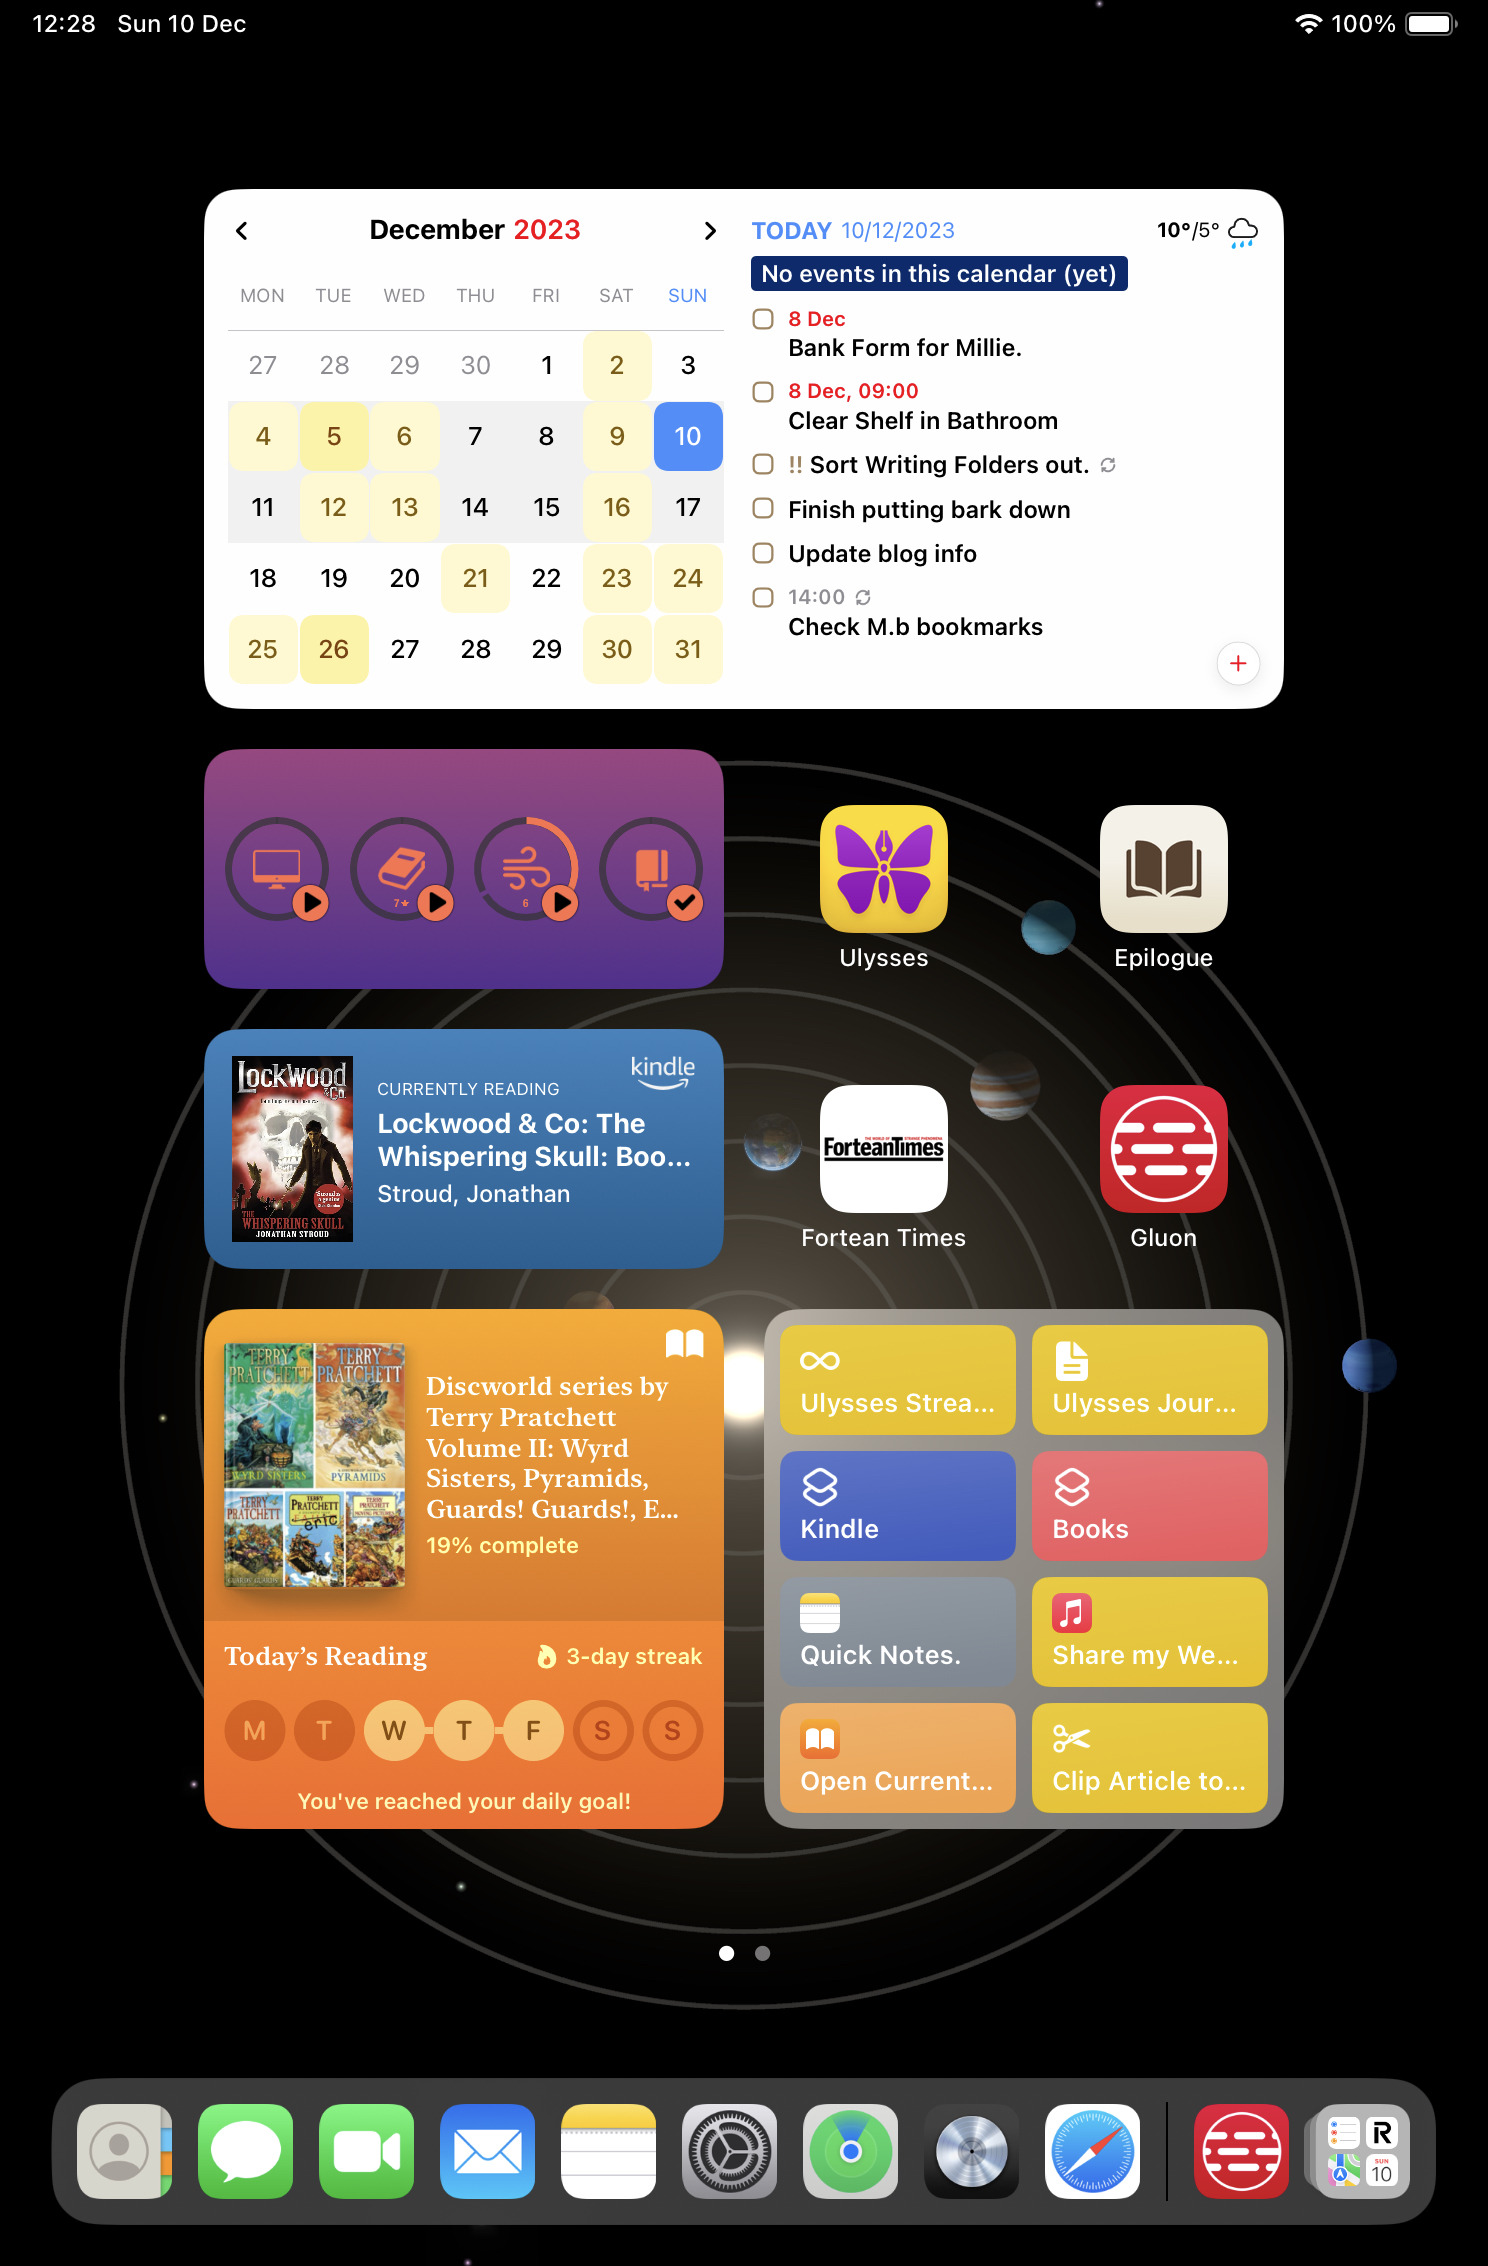 iPad screenshot. Calendar app top, reading apps and shortcuts, with magazines and small app buttons completing. Native Apple apps along the bottom. 